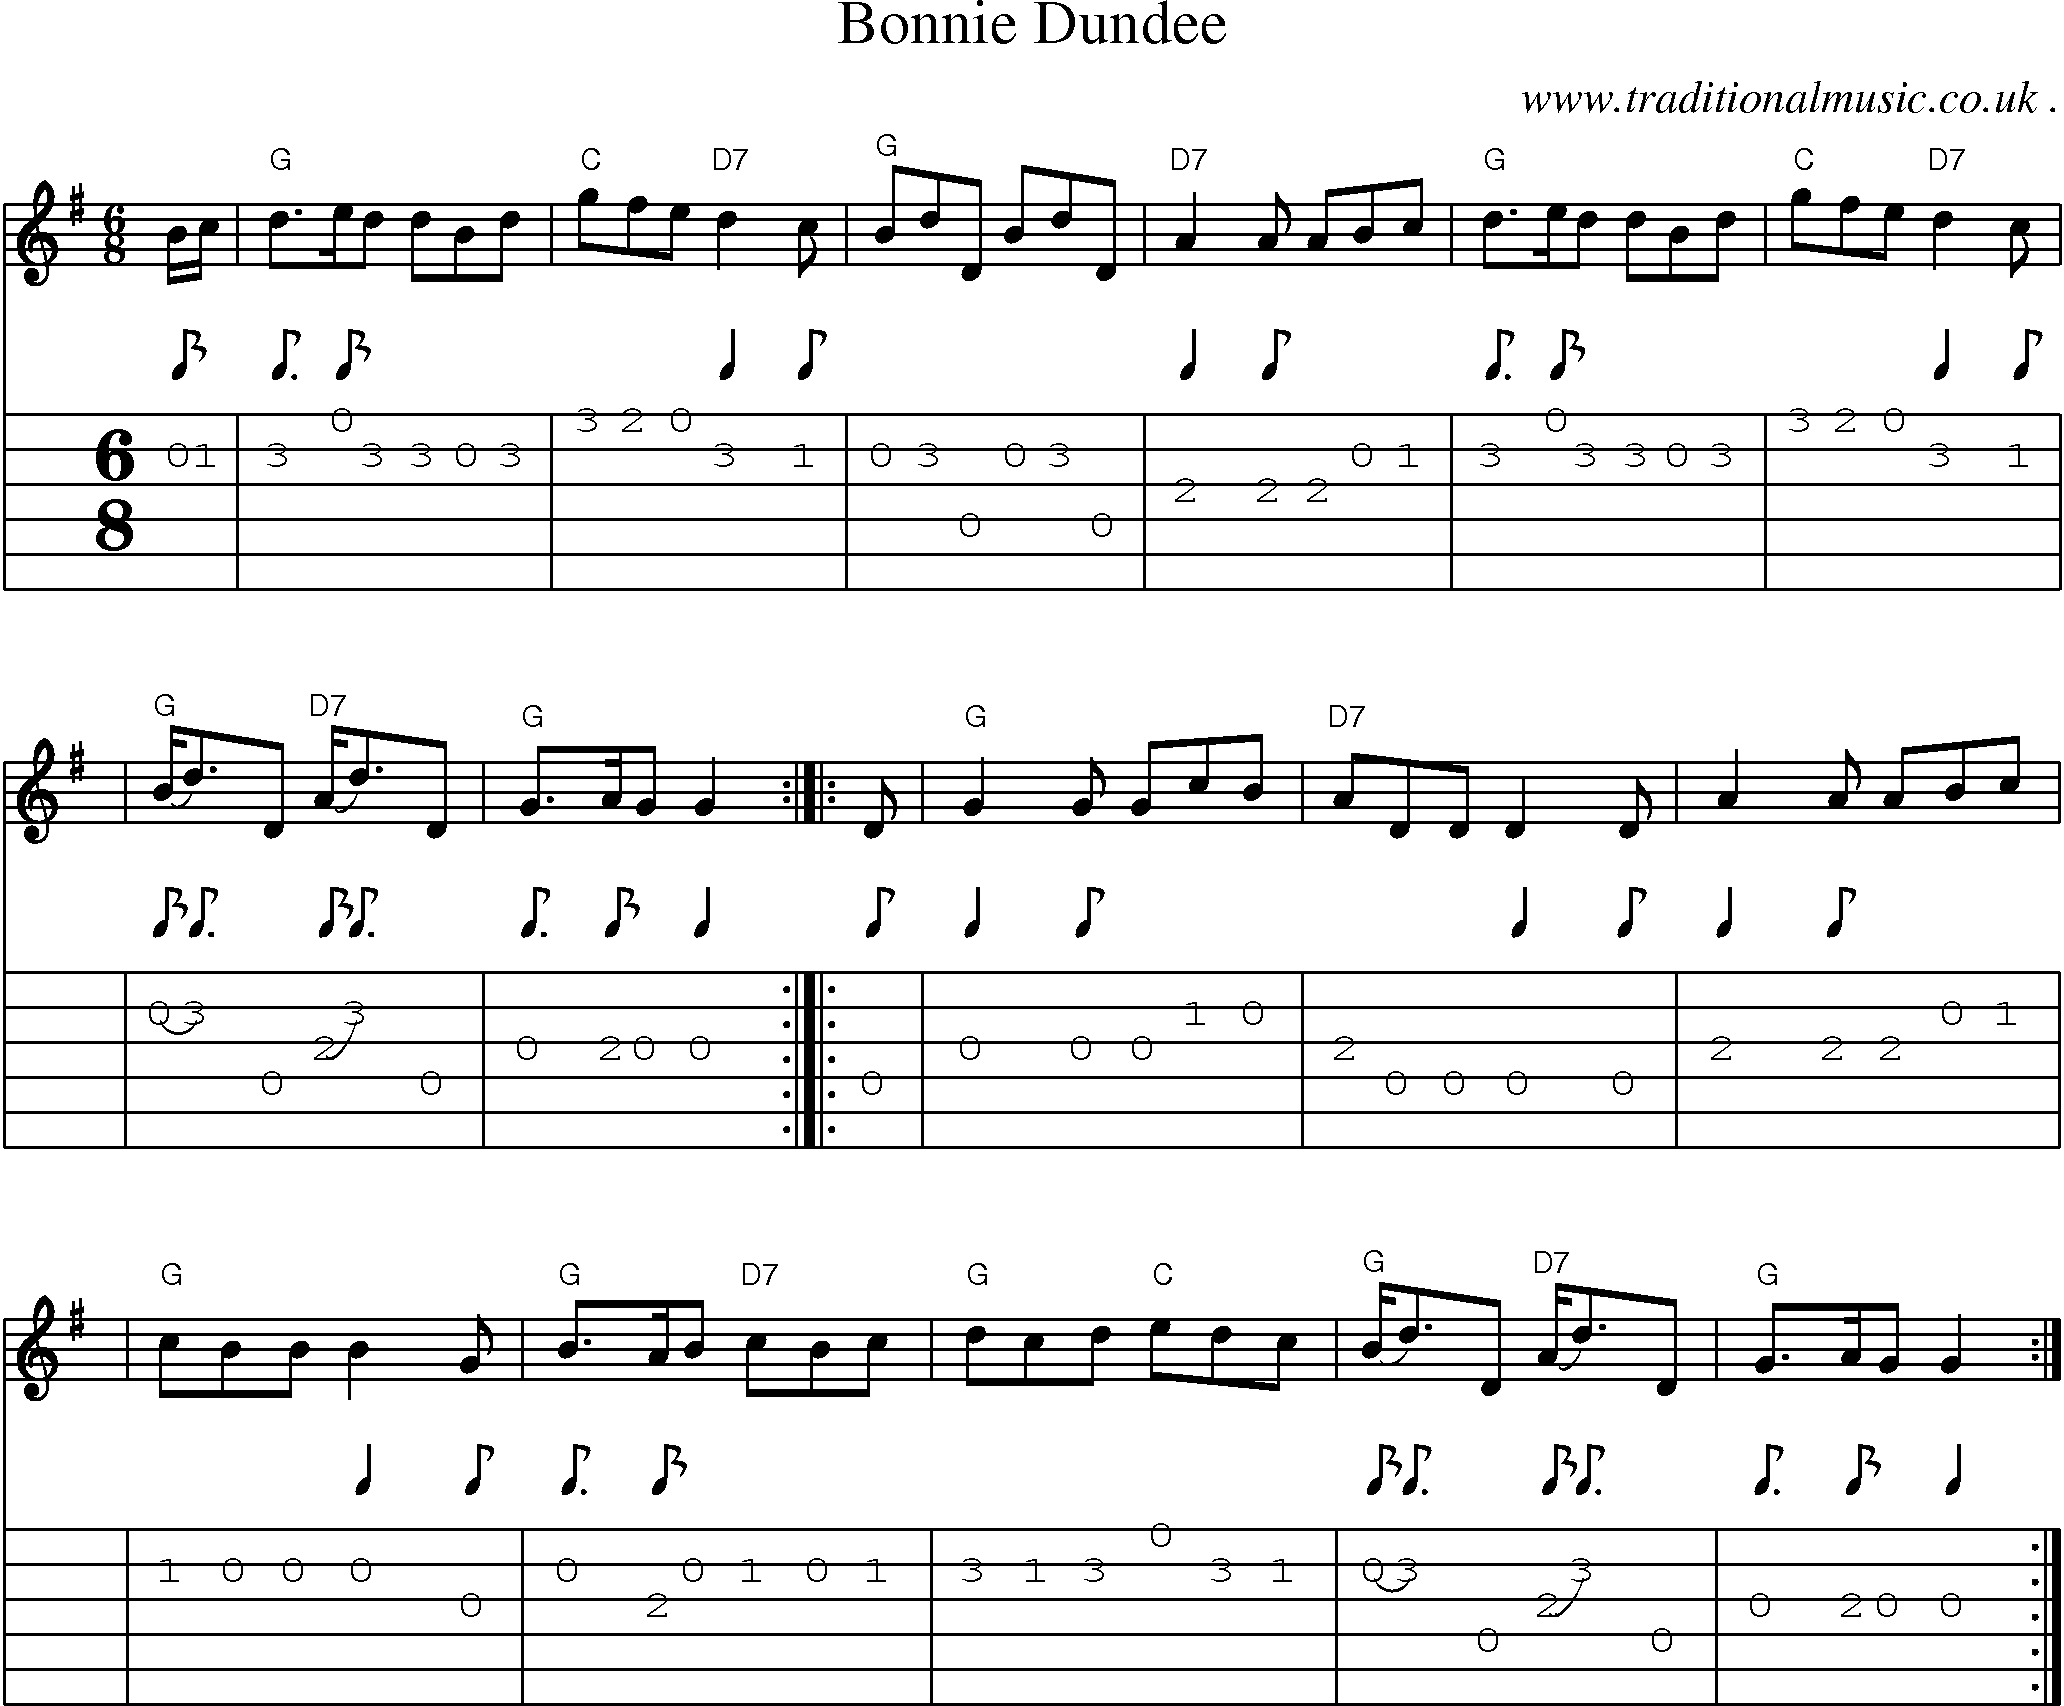 Sheet-music  score, Chords and Guitar Tabs for Bonnie Dundee